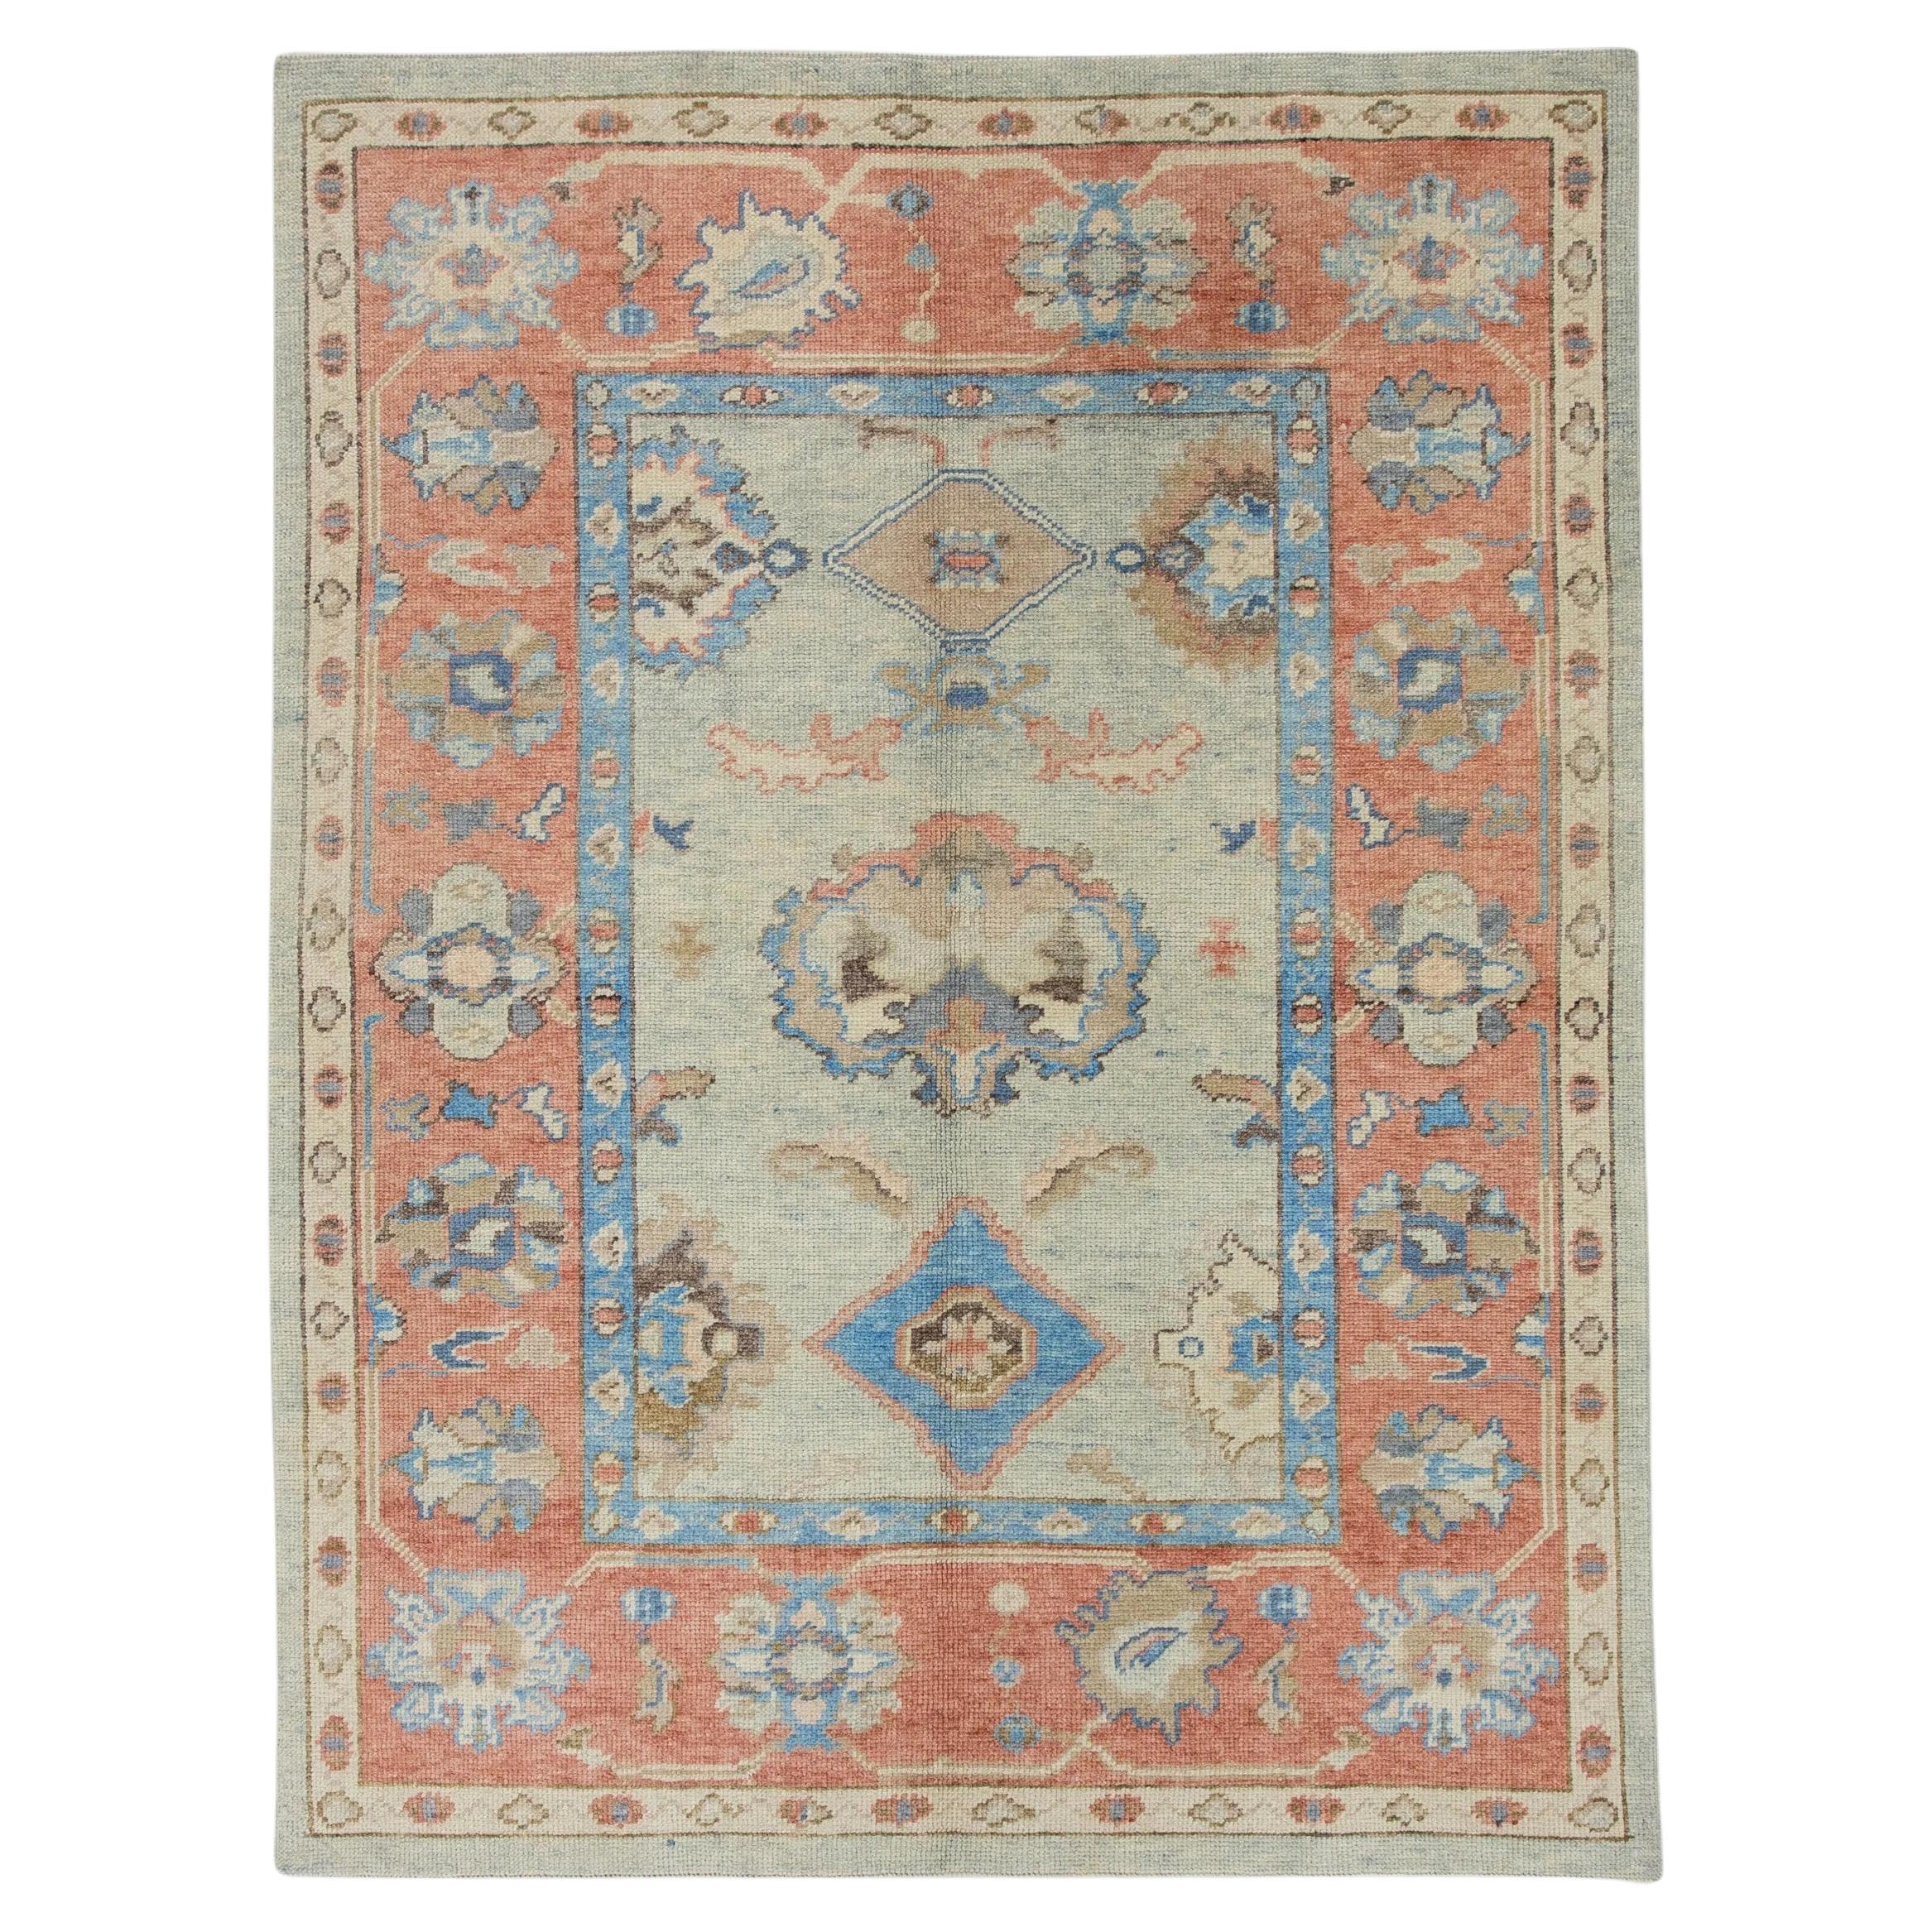 Red and Blue Floral Handwoven Wool Turkish Oushak Rug 5'3" x 6'10" For Sale